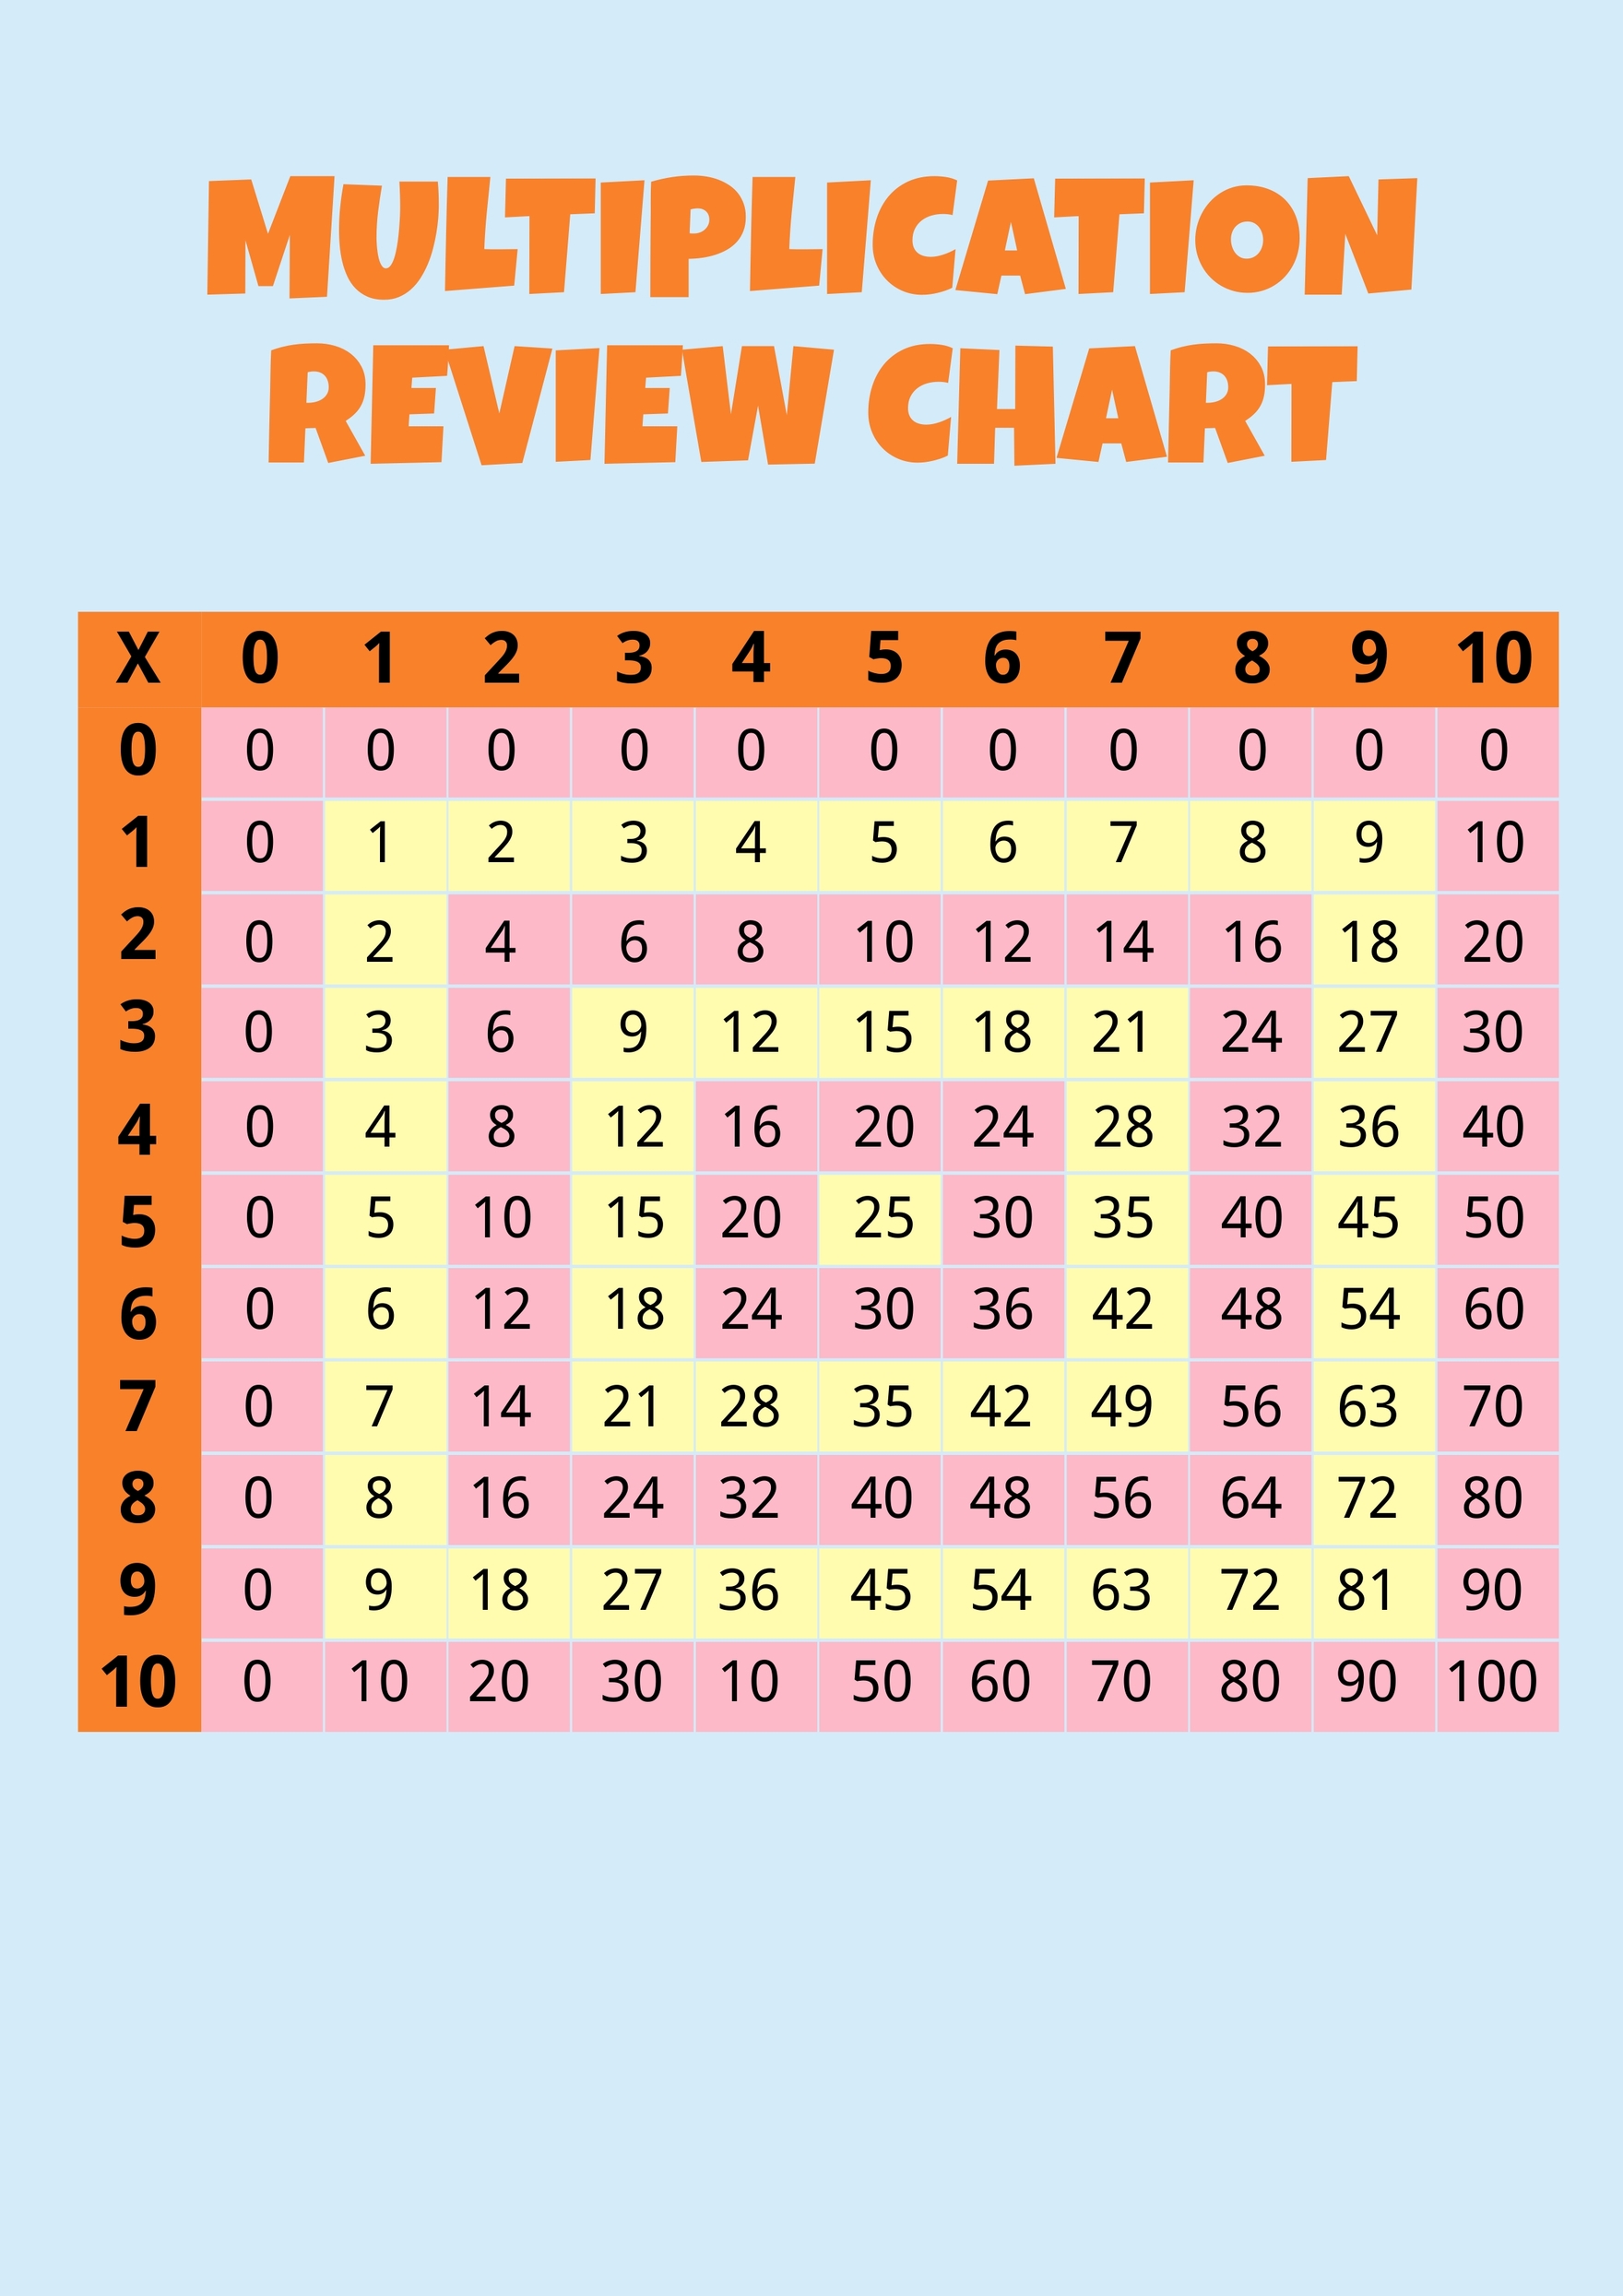 Free Multiplication Review Chart Template in PDF, Illustrator